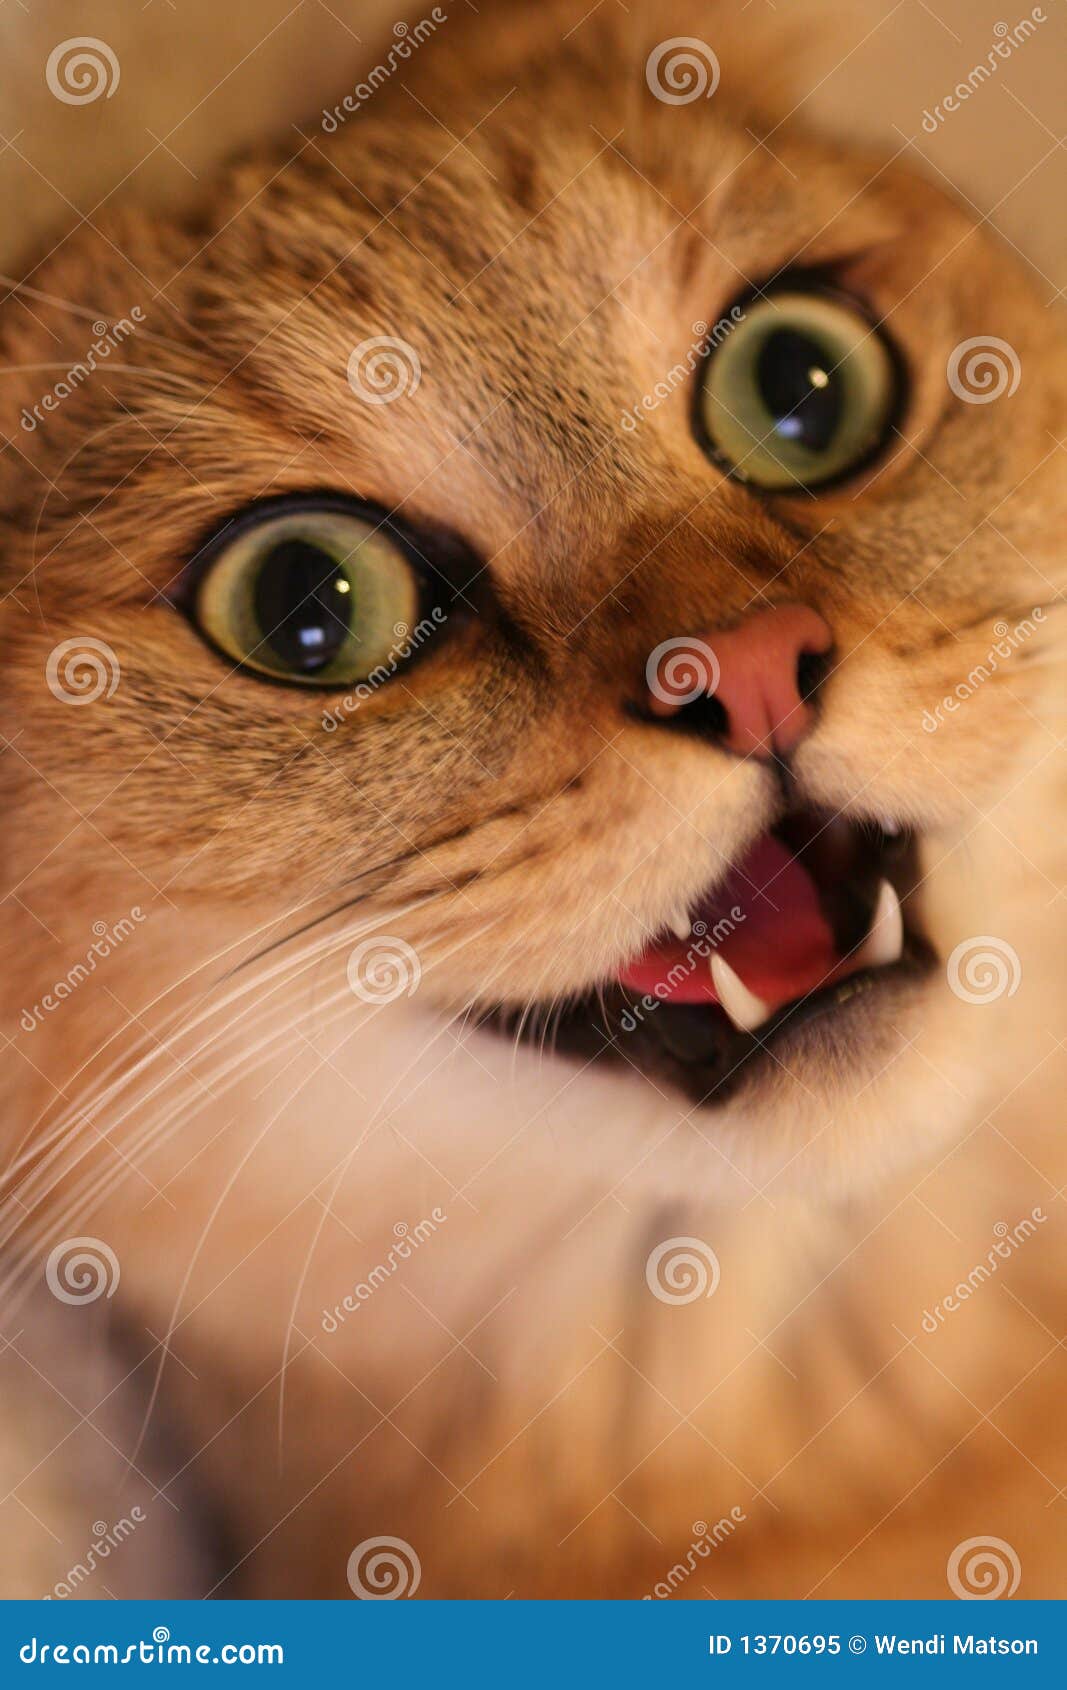 Crazy cat stock image. Image of mammal, tawny, whisker - 1370695